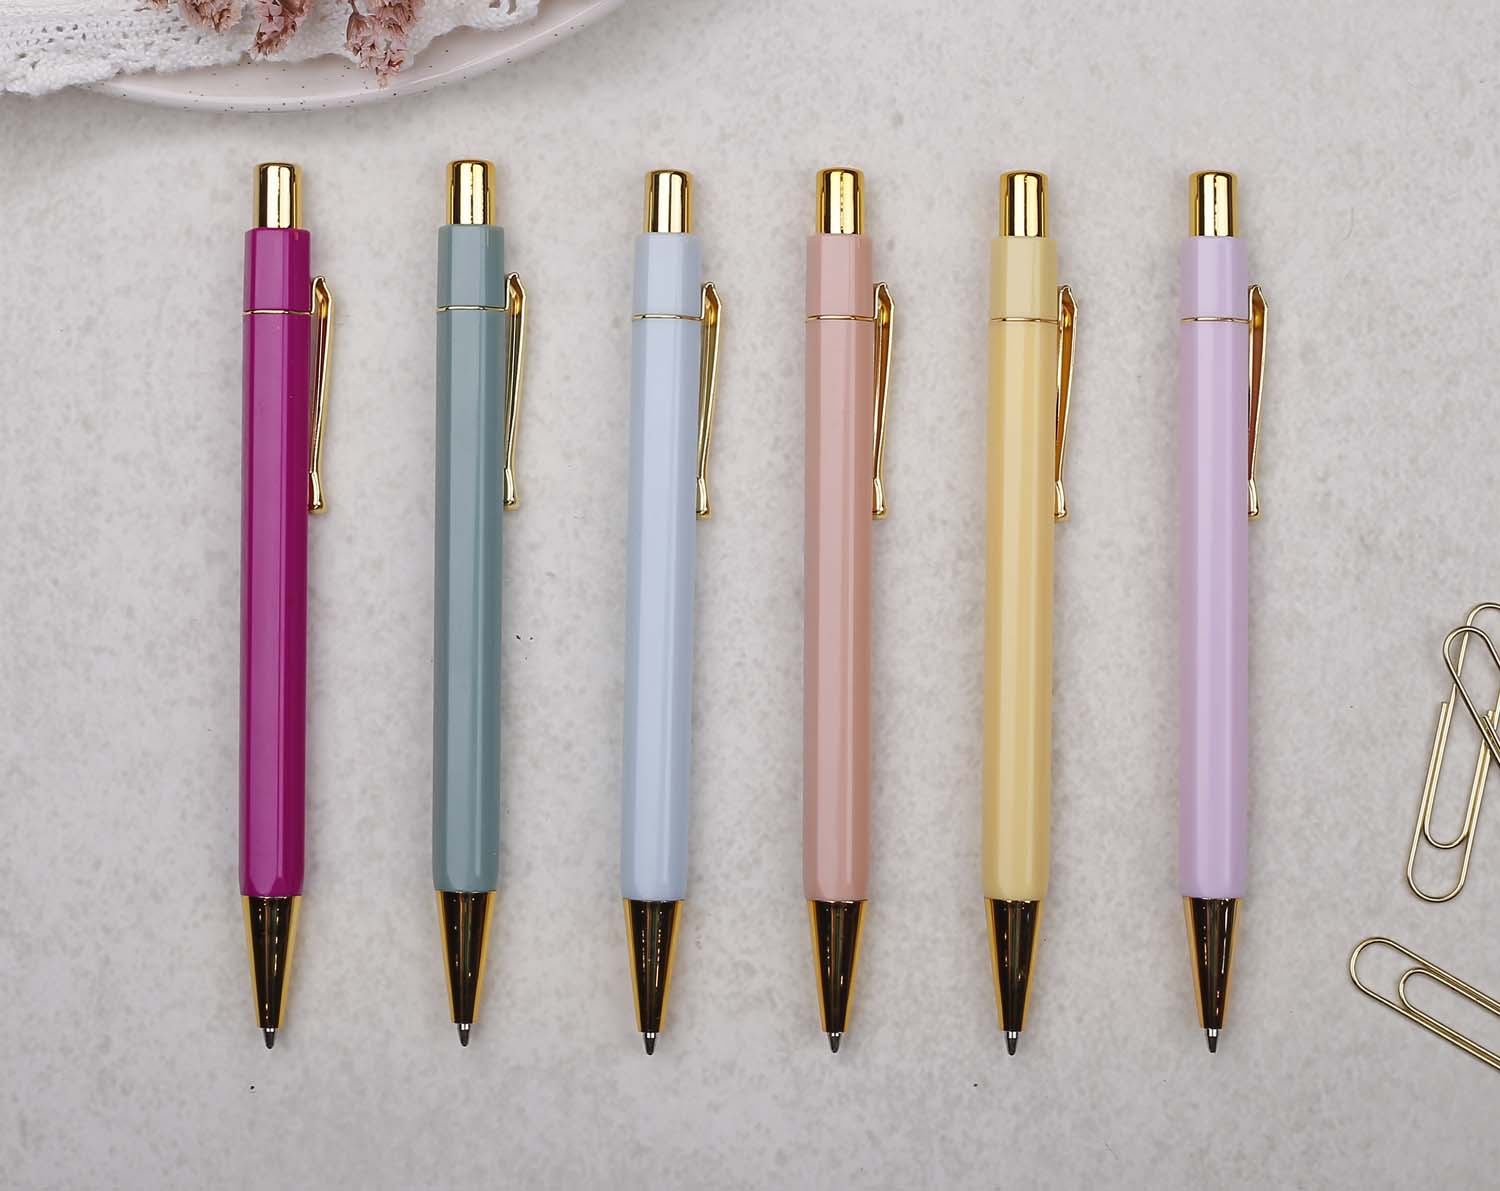 A premium sage green and gold pen with ballpoint tip and hexagonal barrel detail. 